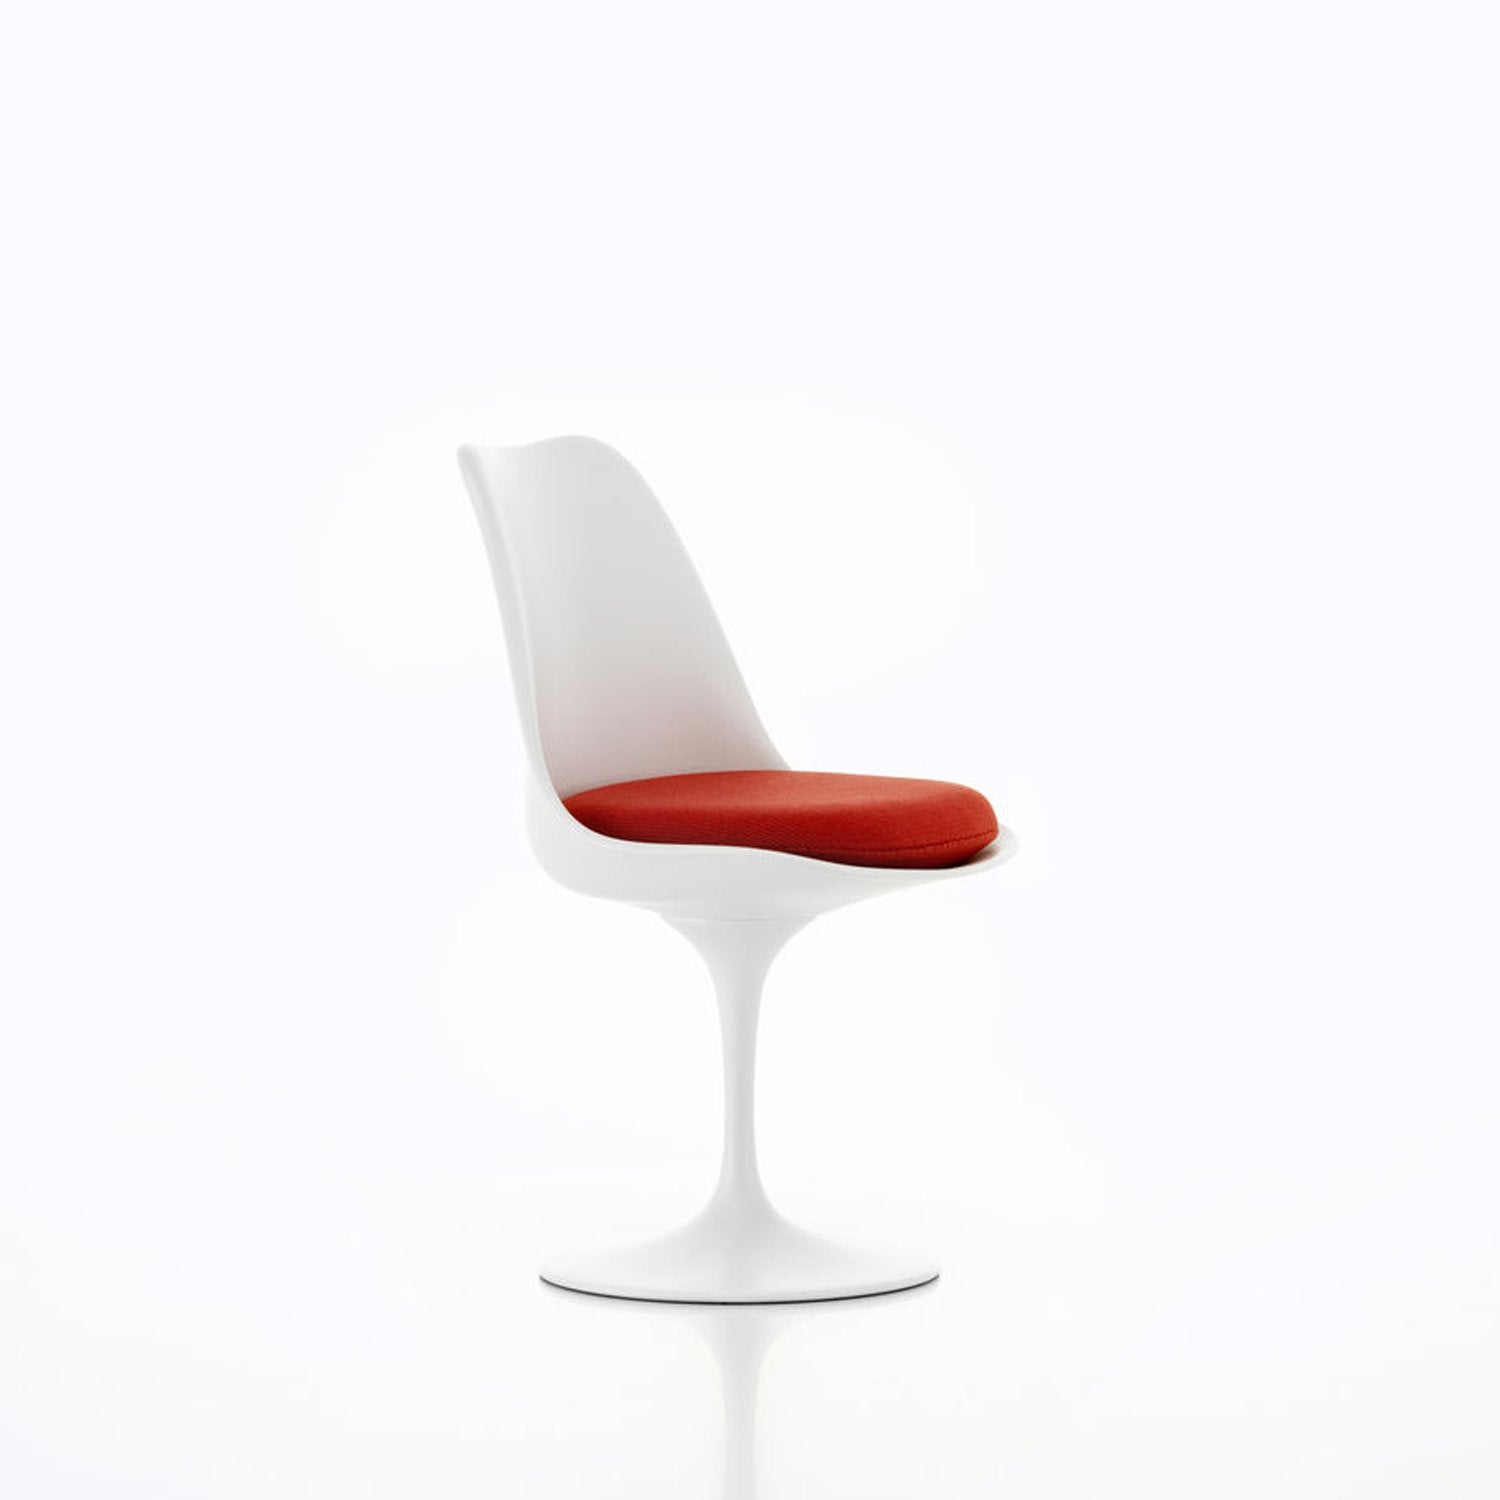 Sold at Auction: MARCEL WANDERS MINIATURE KNOTTED CHAIR FOR VITRA